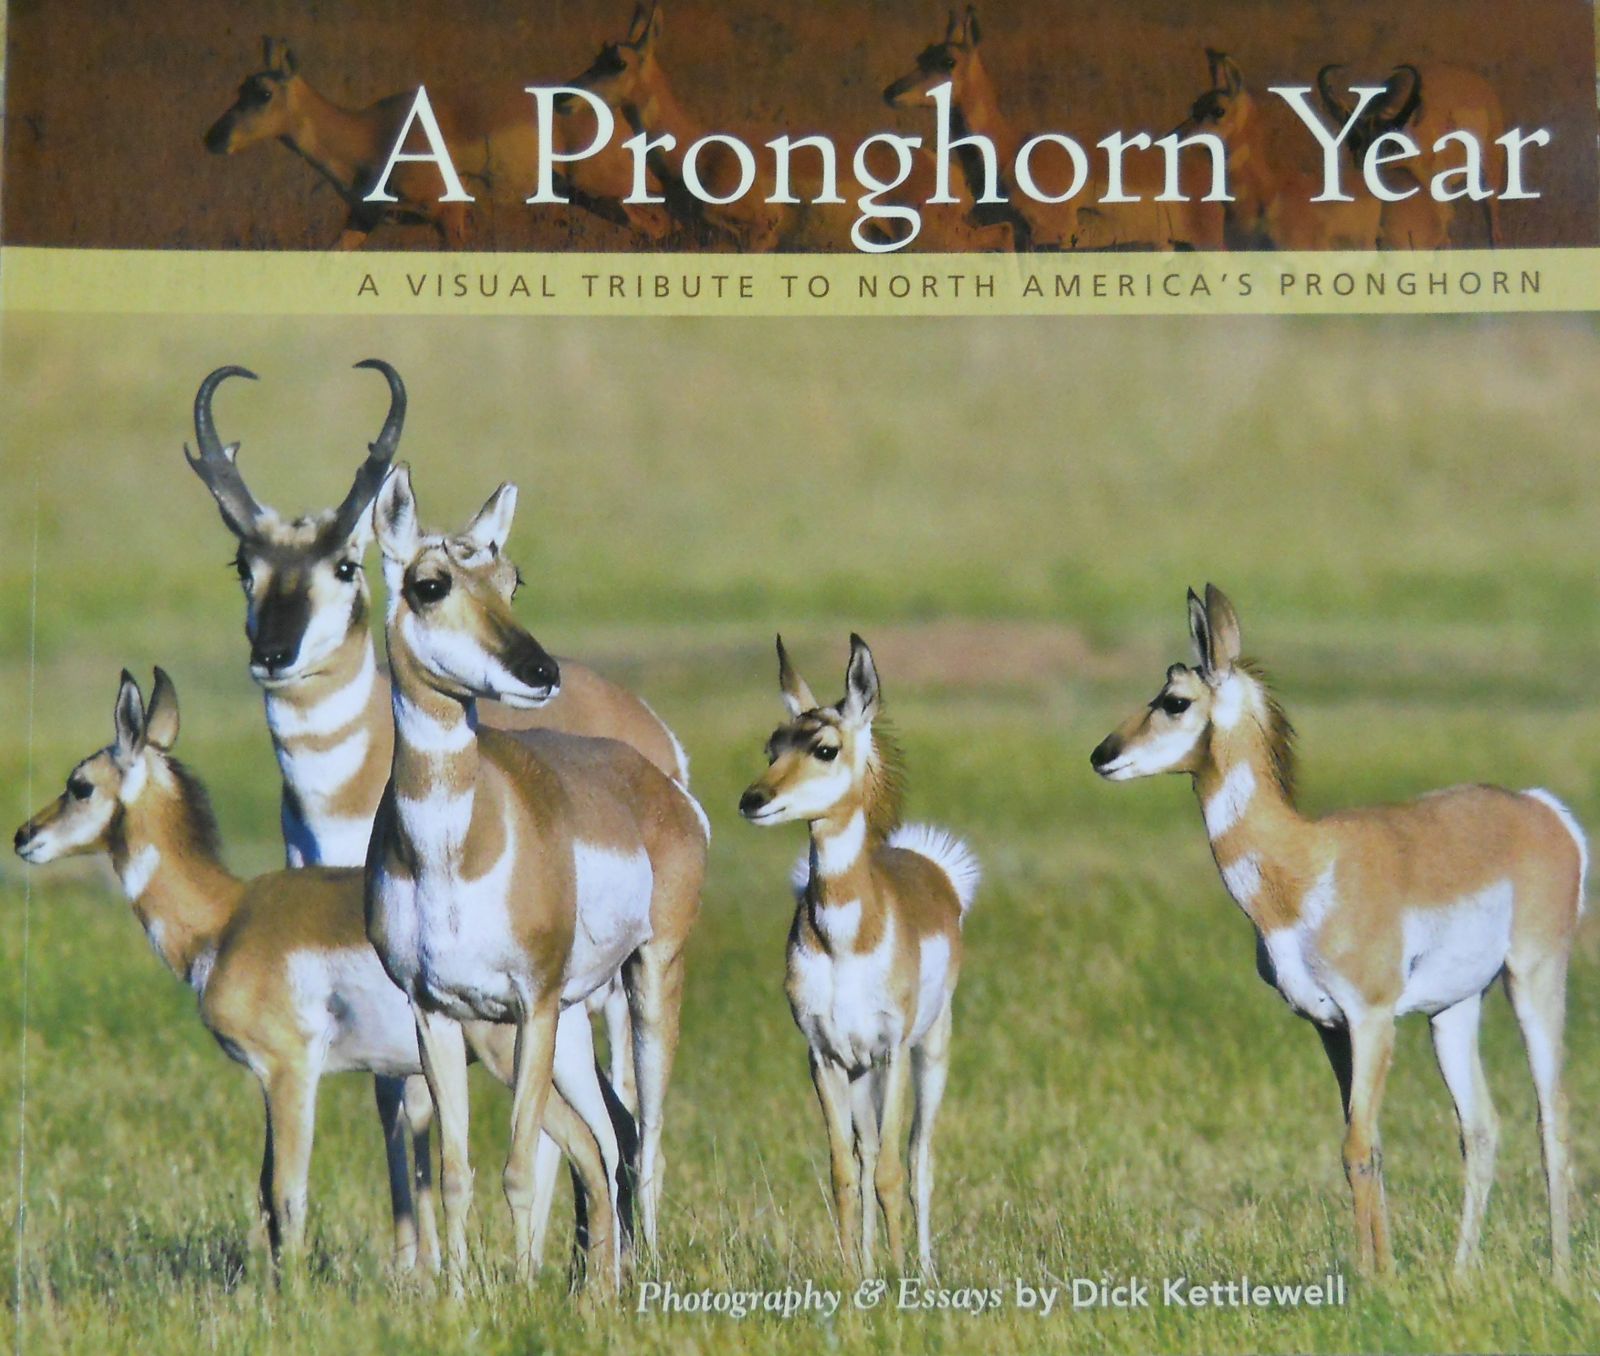 A Pronghorn Year Museum Of The Mountain Man